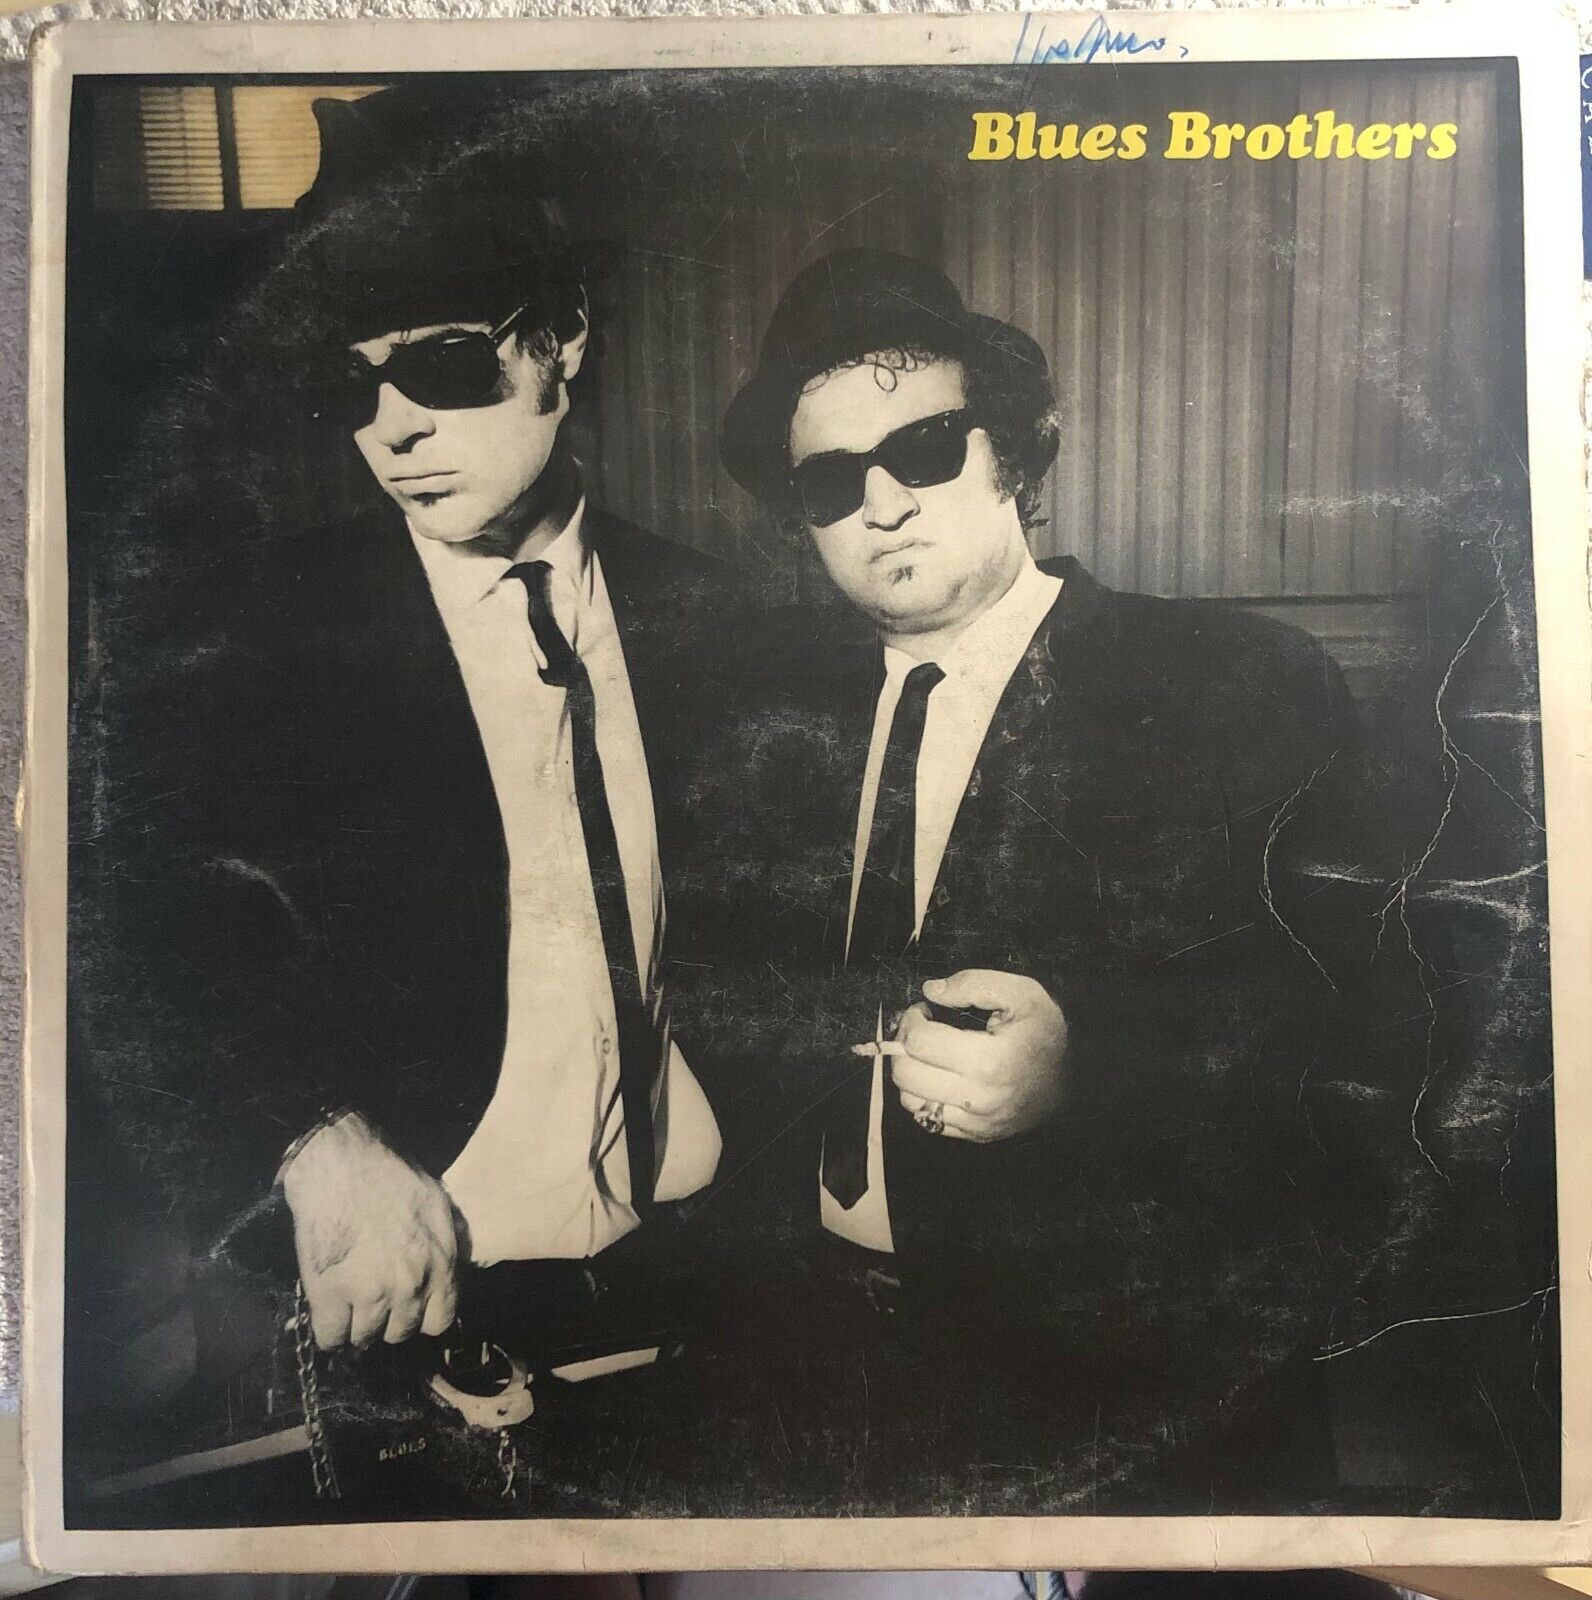 Briefcase Full of Blues VINILE di Blues Brothers,  1981,  Atlantic